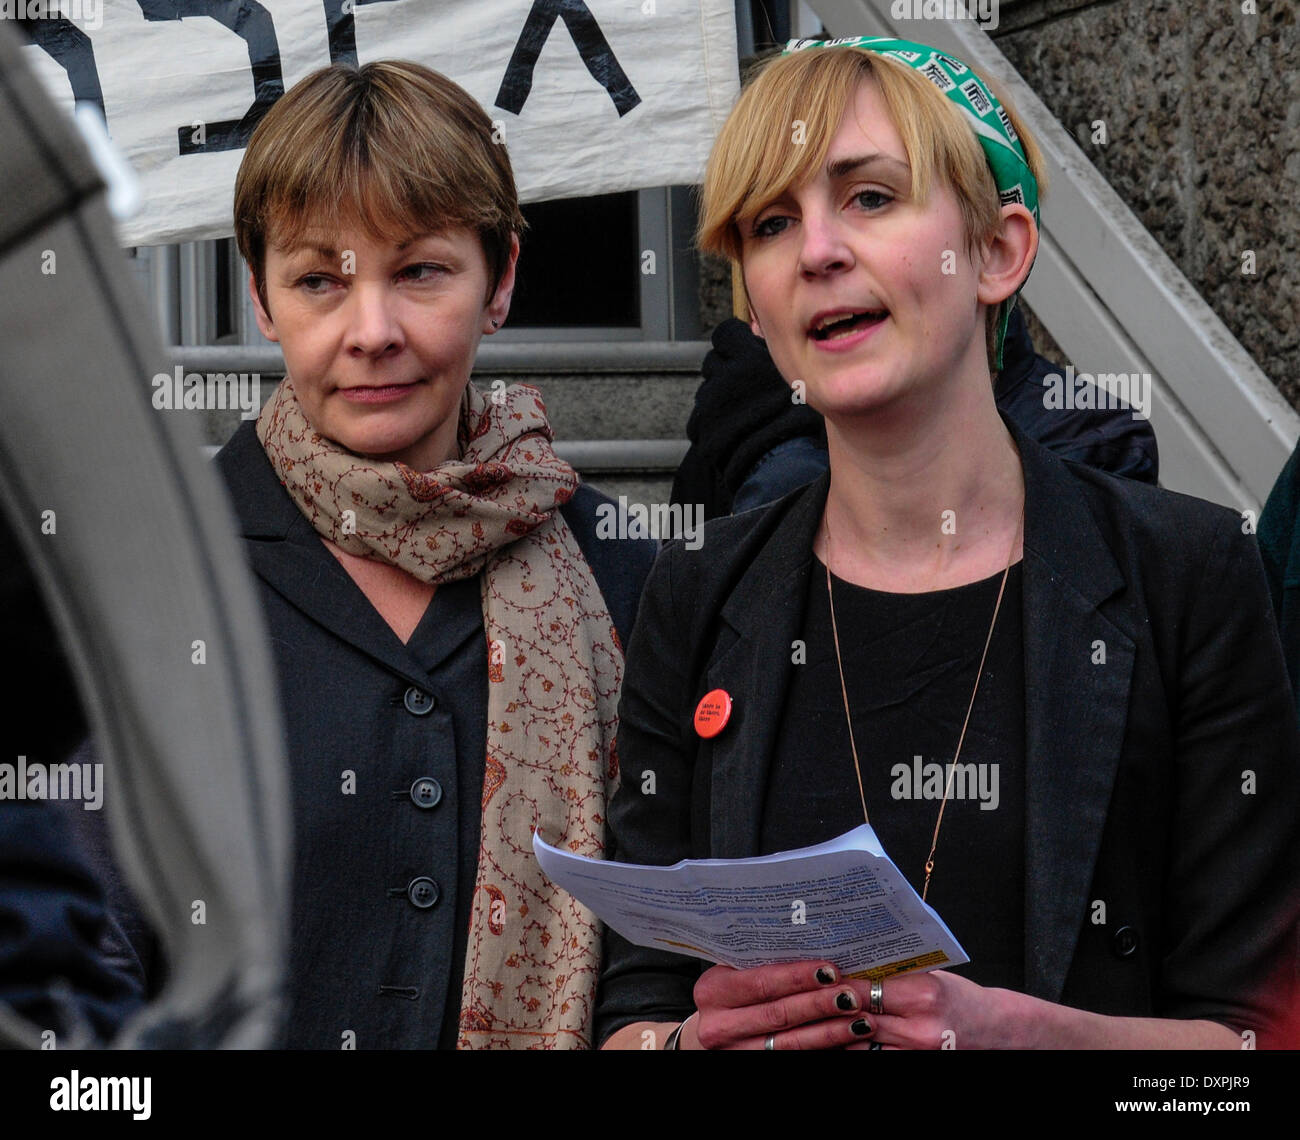 Brighton, East Sussex, UK..28 March  2014..Caroline Lucas MP outside Brighton Court  with co defendants after day 5 of their trial charged with obstructing the highway and a public order offence at Balcome where Cuadrilla was test drilling in August. The case has been adjourned to 17 April. Ms Lucas joined co defendants and supporters outside the court where Sheila Menon, also charged, read a statement  about Fracking and Ms Lucas thanked her supporters.. David Burr/Alamy Live News Stock Photo